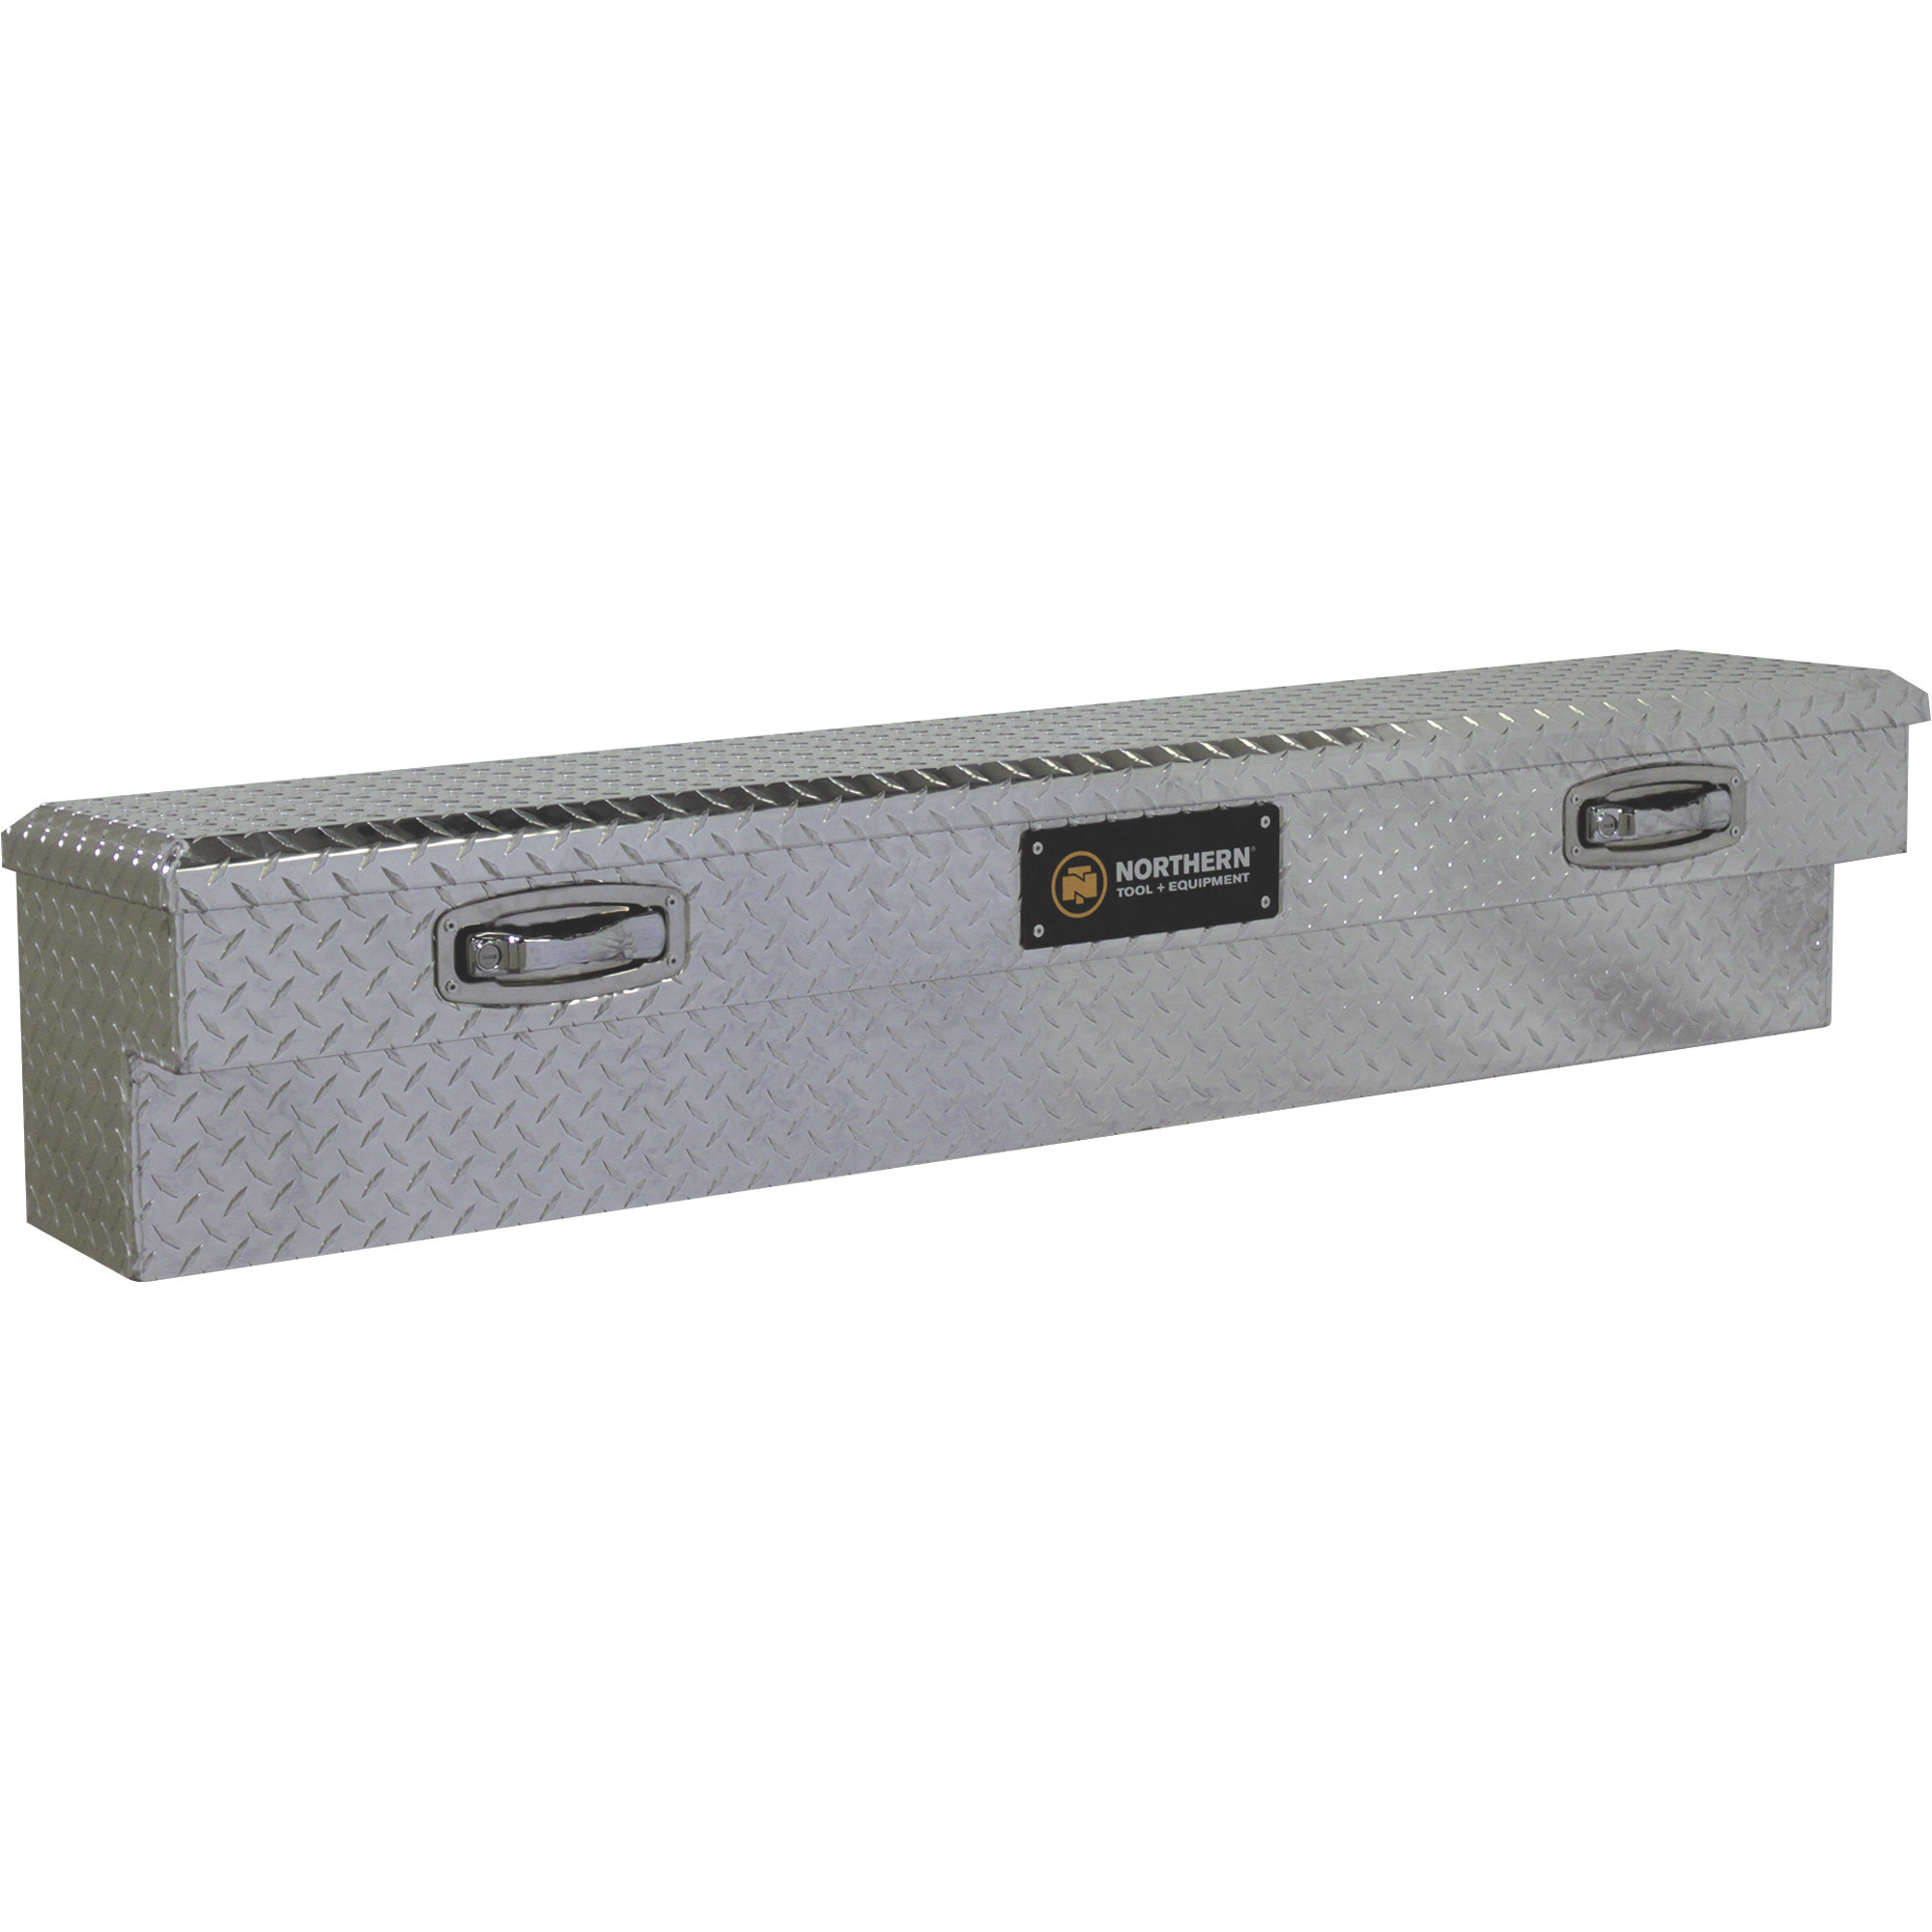 Side-Mount Truck Tool Box — Aluminum, Diamond Plate, Pull Handle Latches, 60Inch x 11.5Inch x 11Inch, Model - Northern Tool 36012758